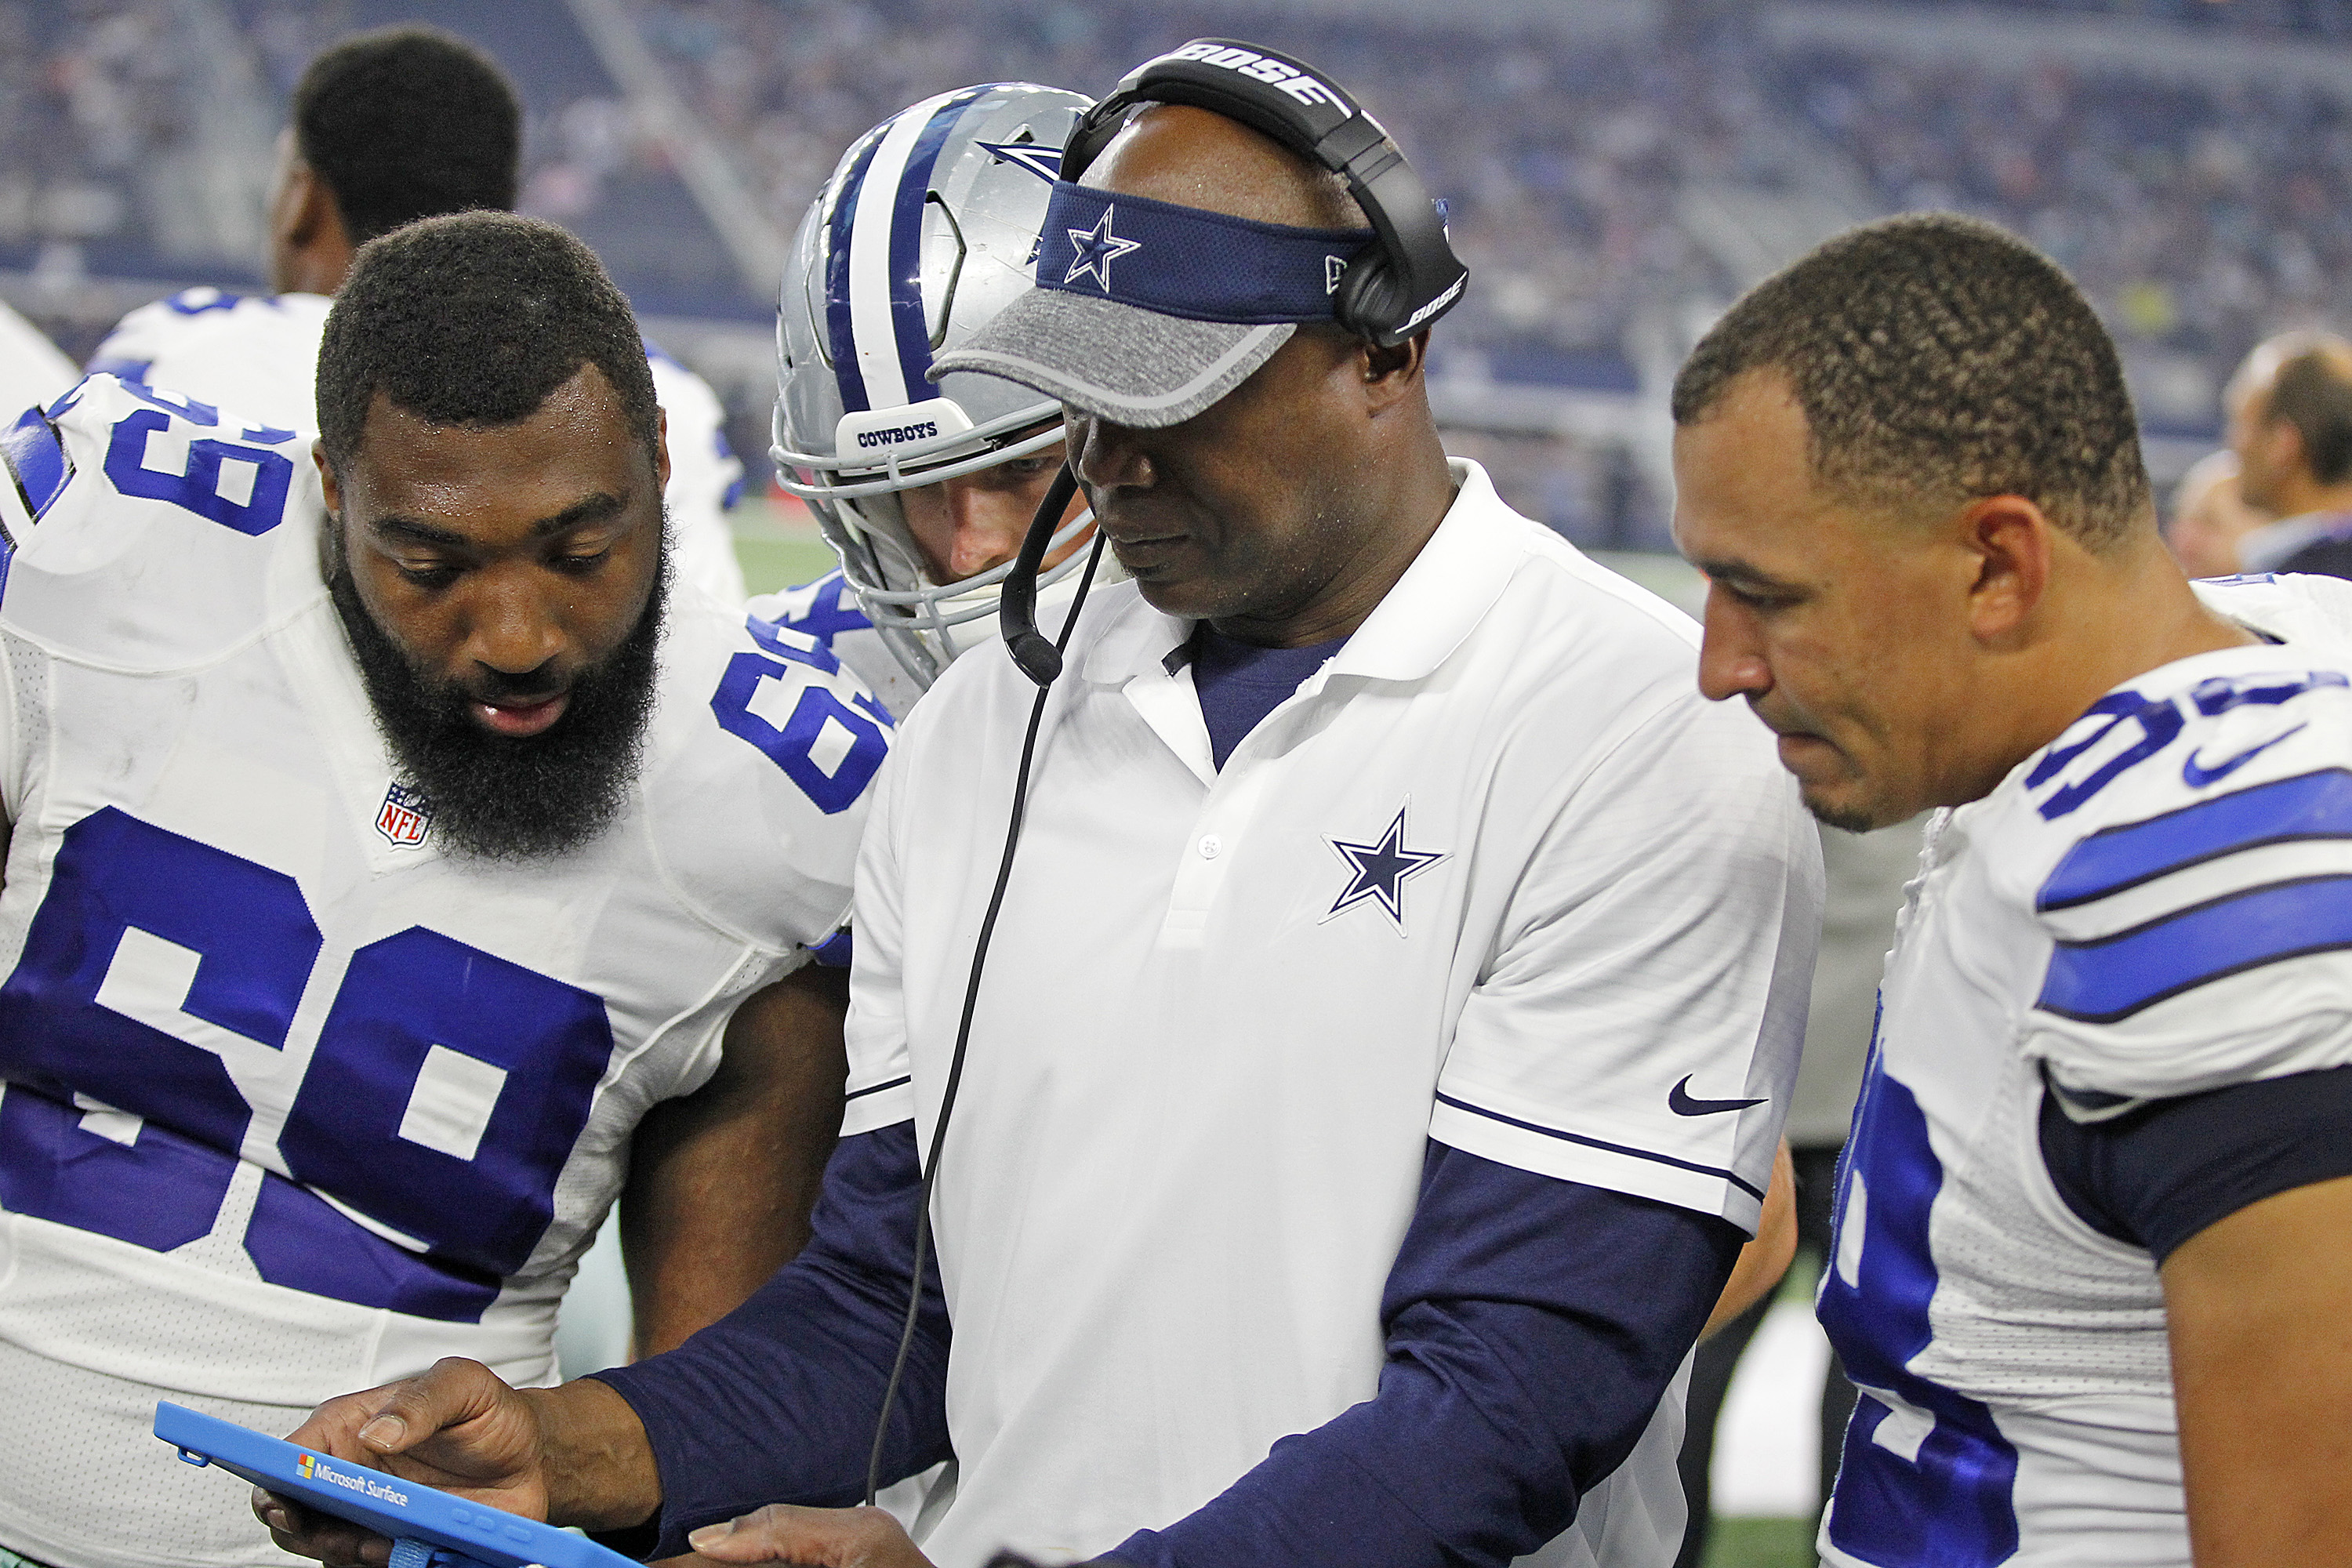 Three Dallas Cowboys players look over the shoulder of a coach holding a Surface Pro 4 tablet